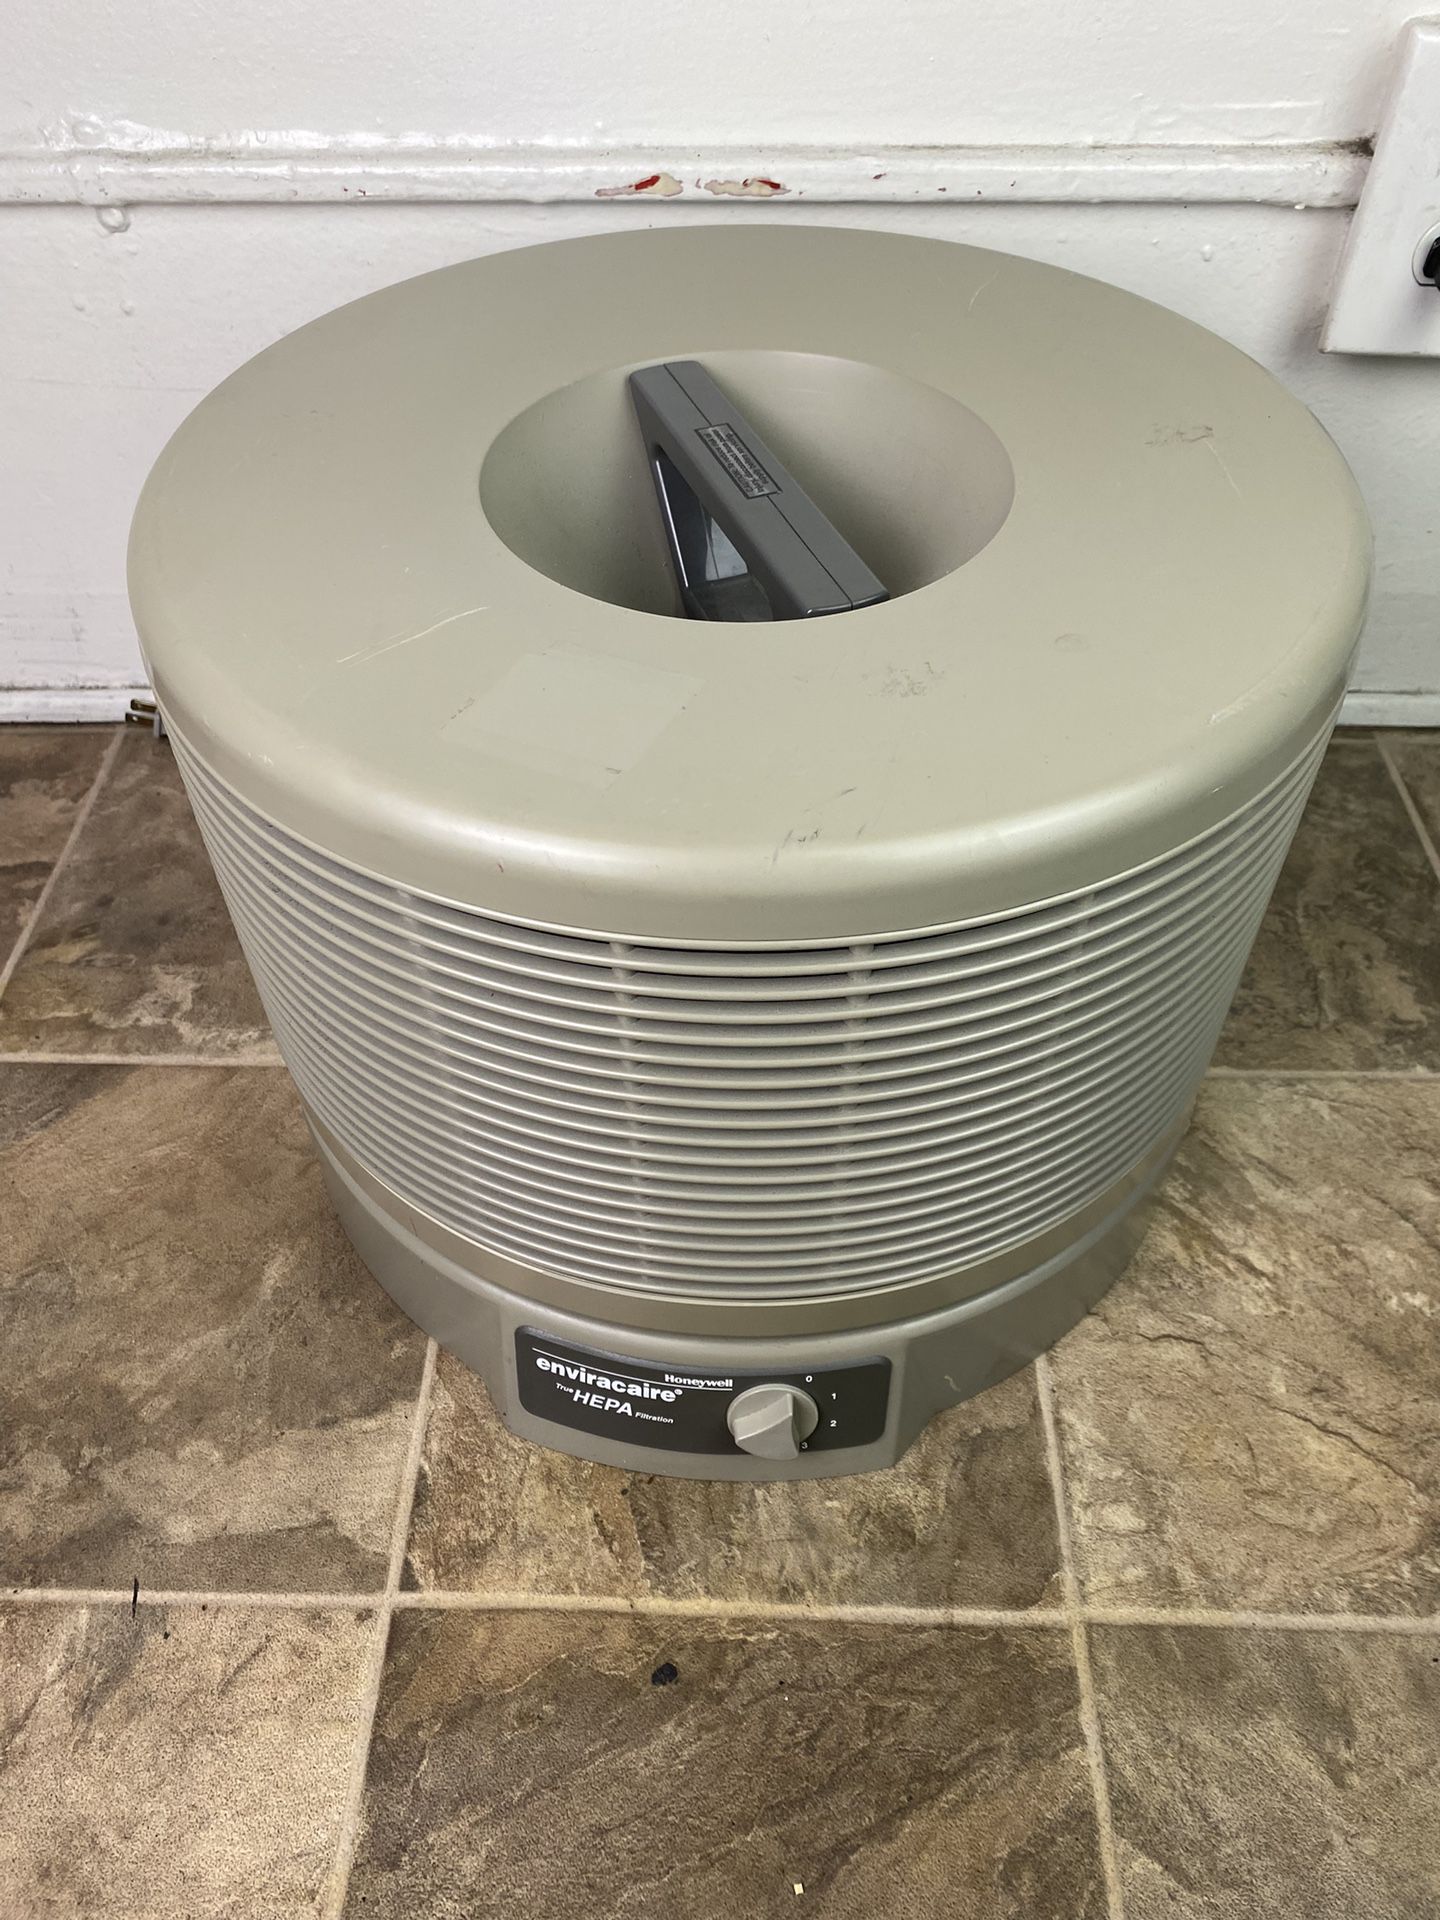 Honeywell Enviracaire Model 12520  HEPA Air Purifier Cleaner 3 Speed Tested